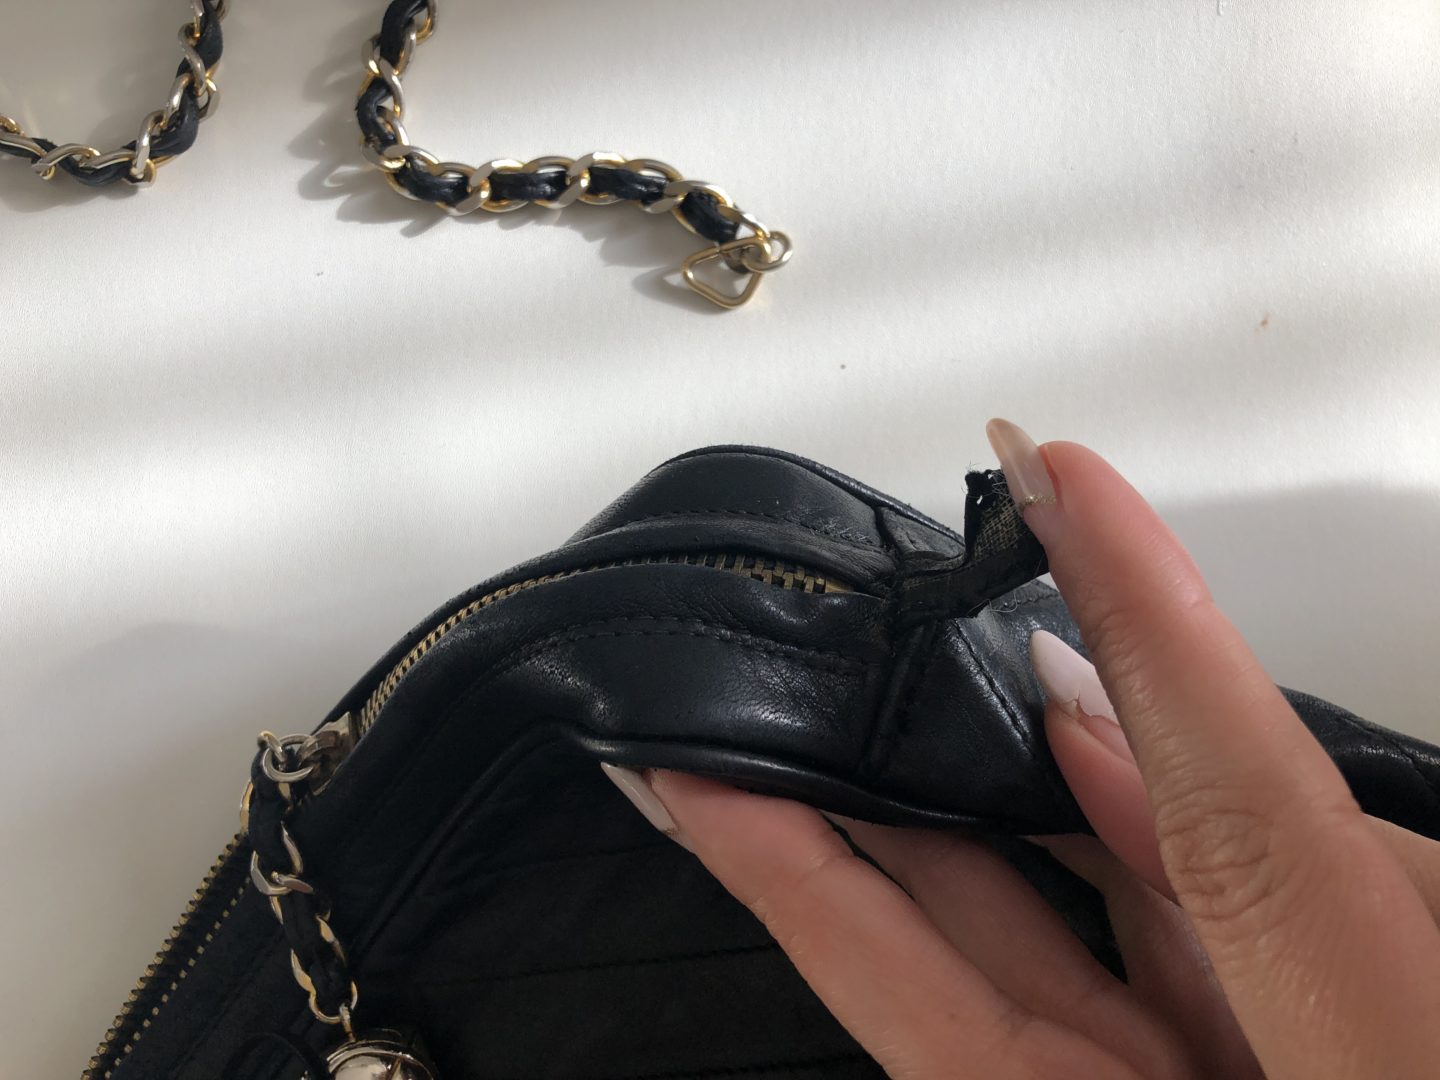 How to Restore Vintage Chanel Bag - A 